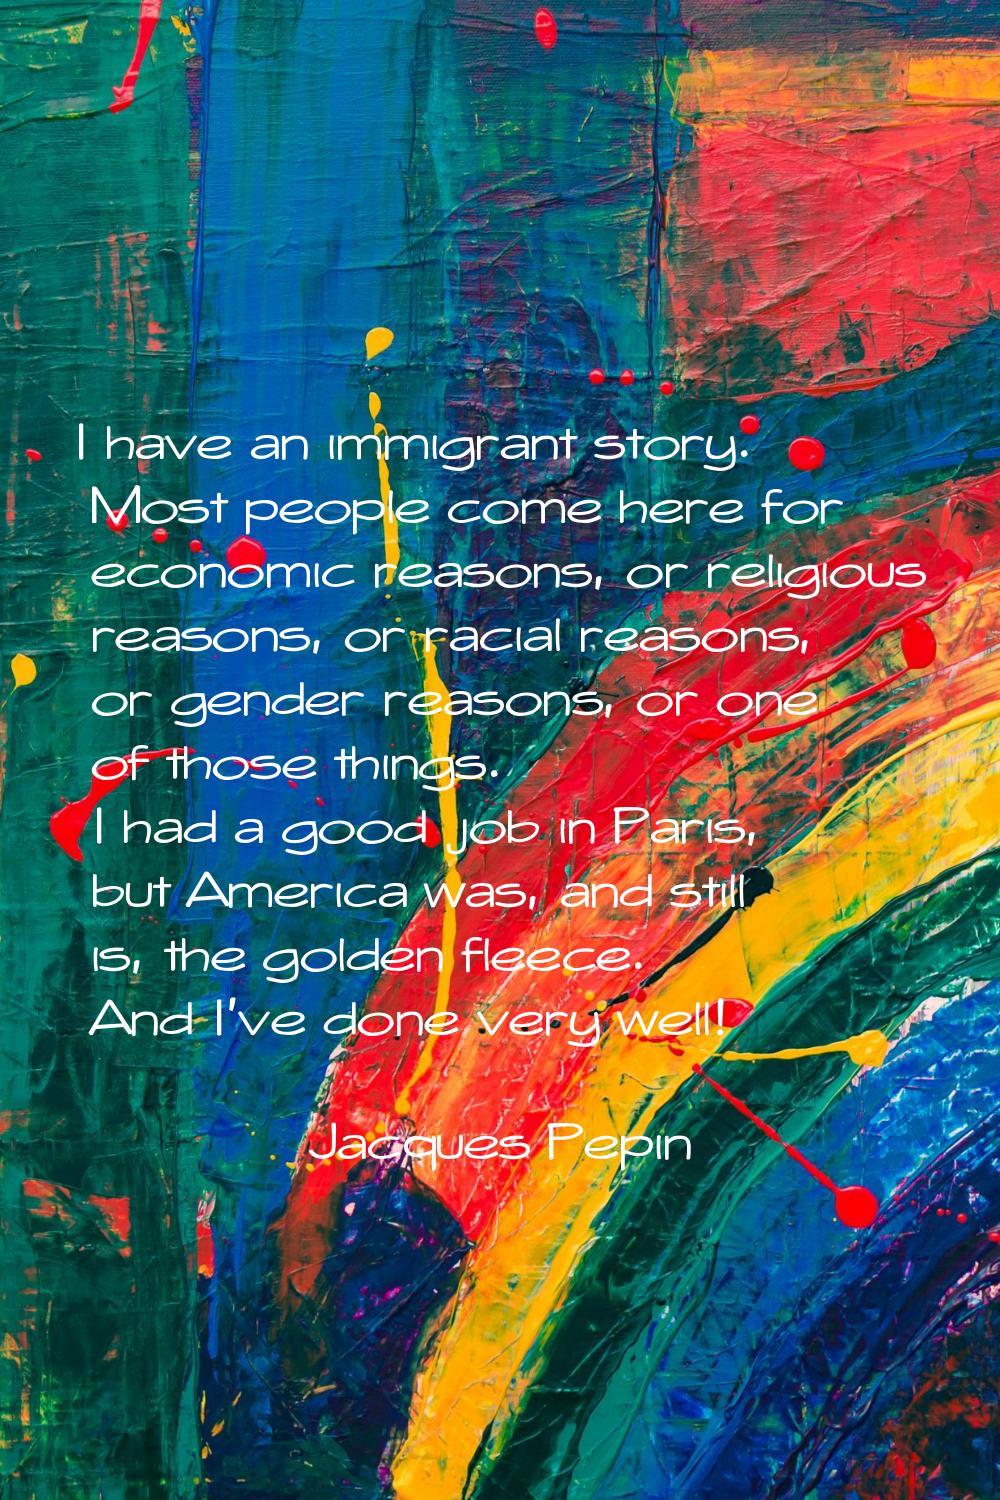 I have an immigrant story. Most people come here for economic reasons, or religious reasons, or rac